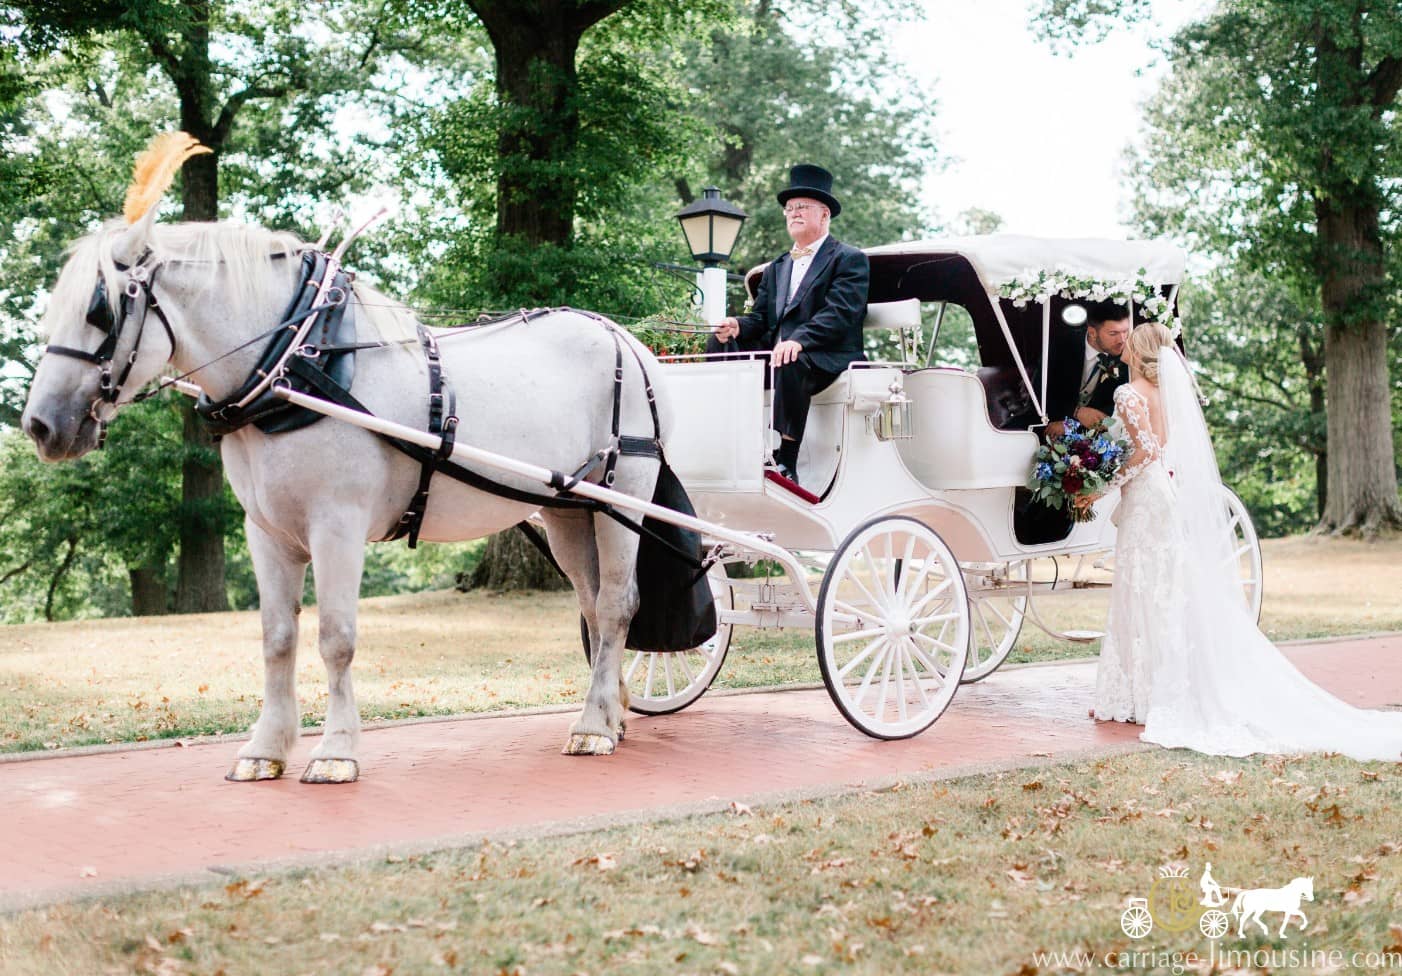 Our Victorian Carriage after a wedding at Oglebay Park in Wheeling WV